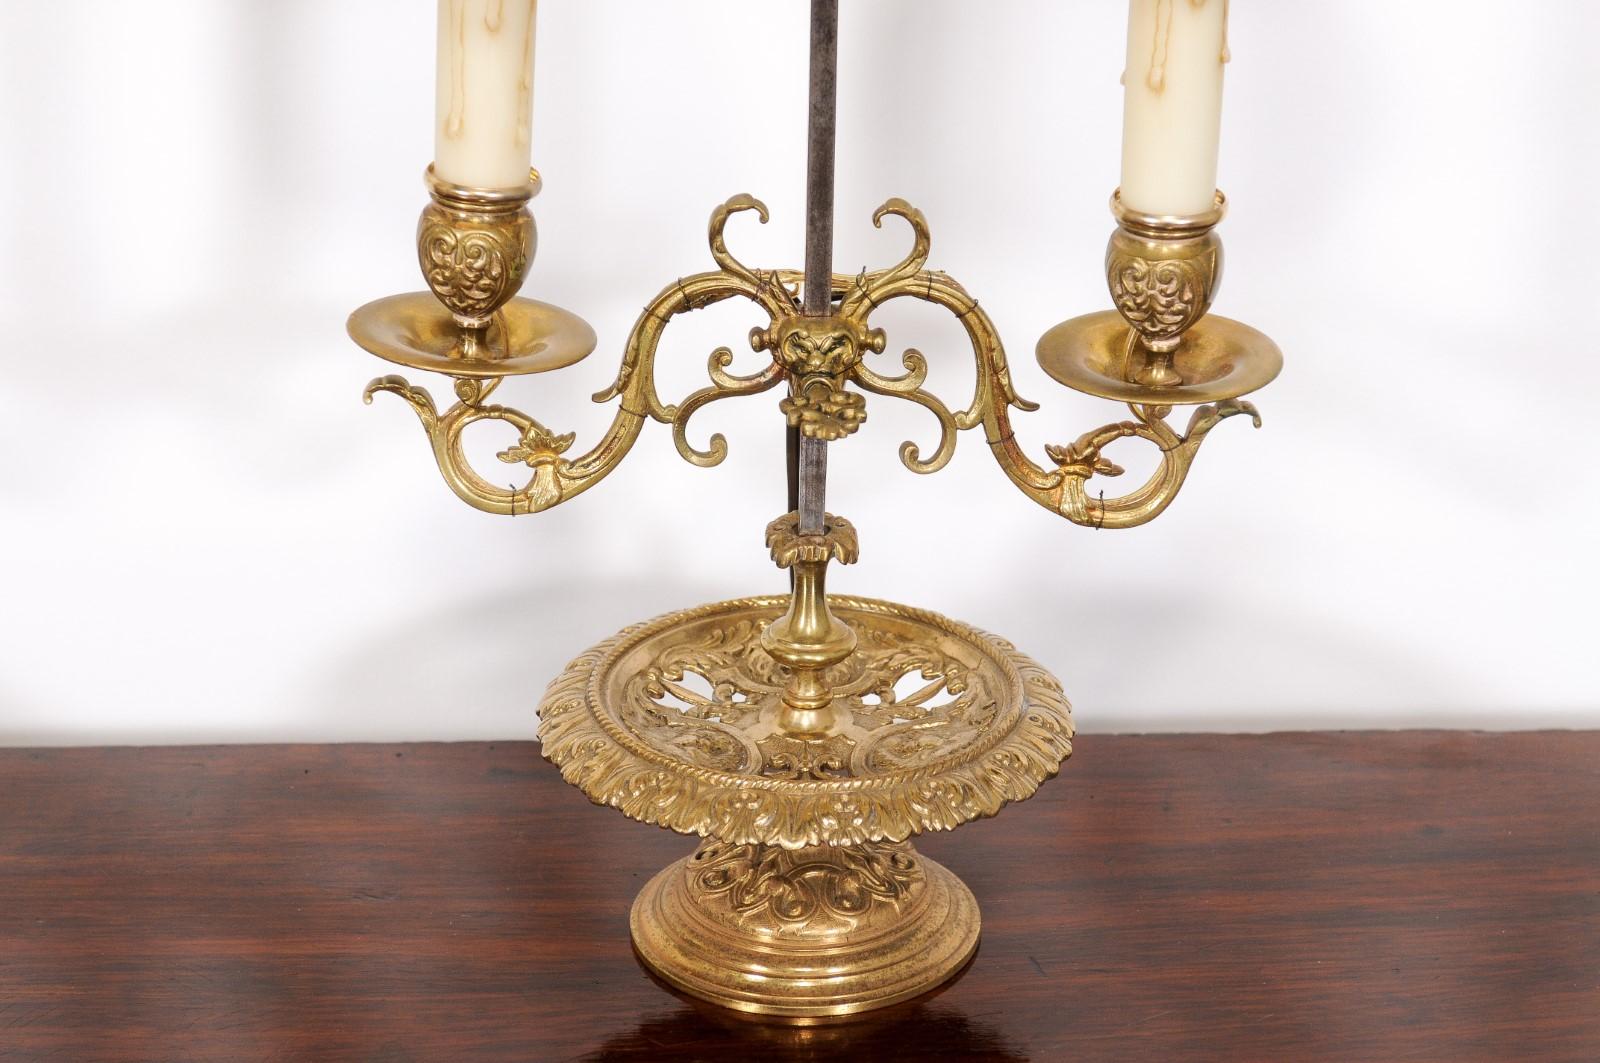 French 19th Century Brass Candlestick Lamps with Scrolling Arms, a Wired Pair For Sale 3